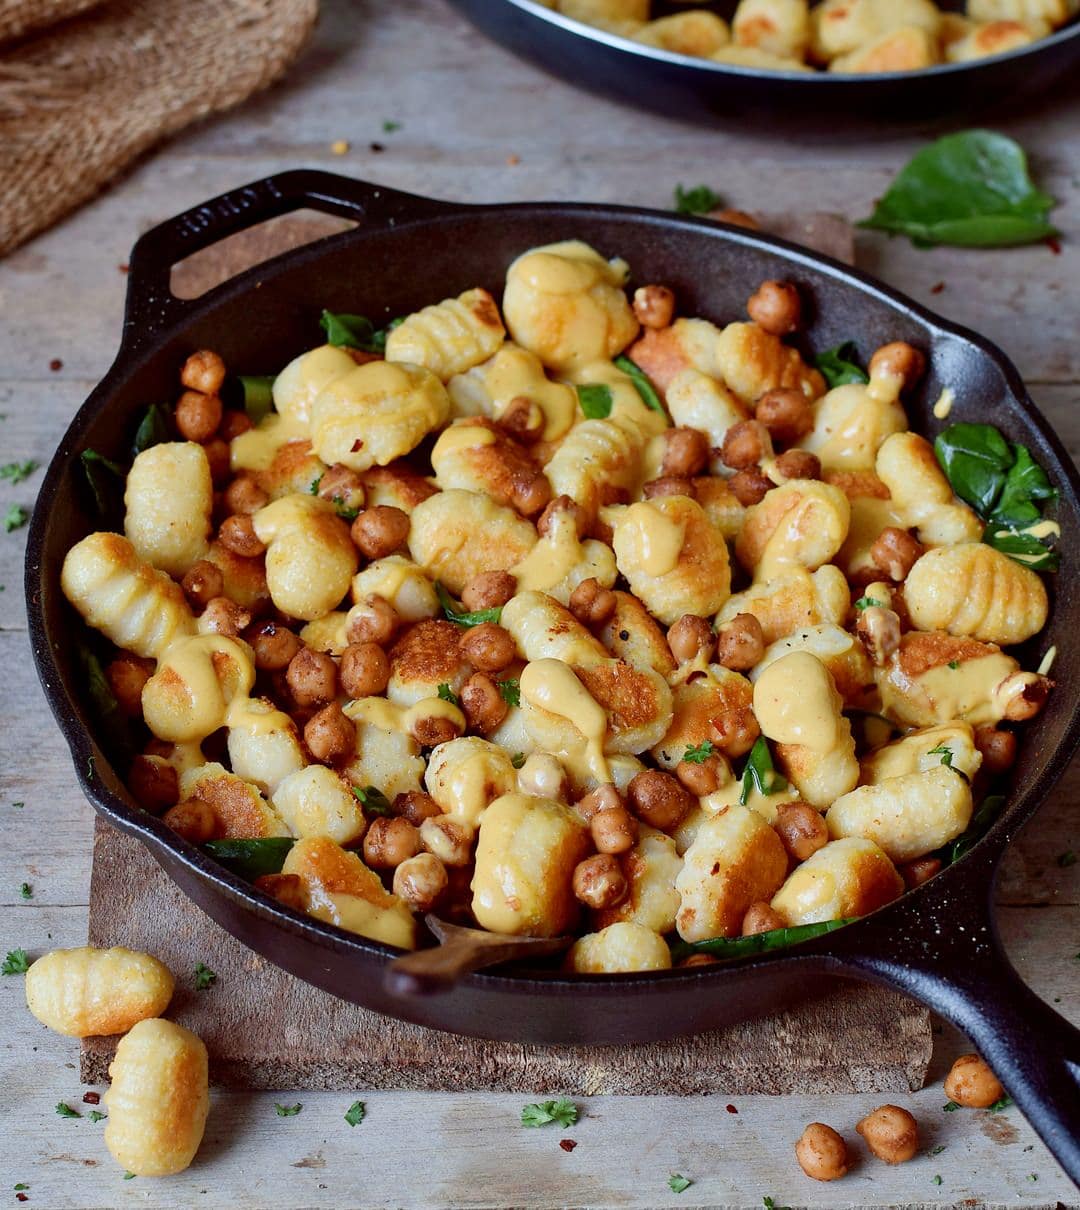 Close-up of homemade gluten-free vegan gnocchi with roasted chickpeas spinach and cheese sauce in a pan